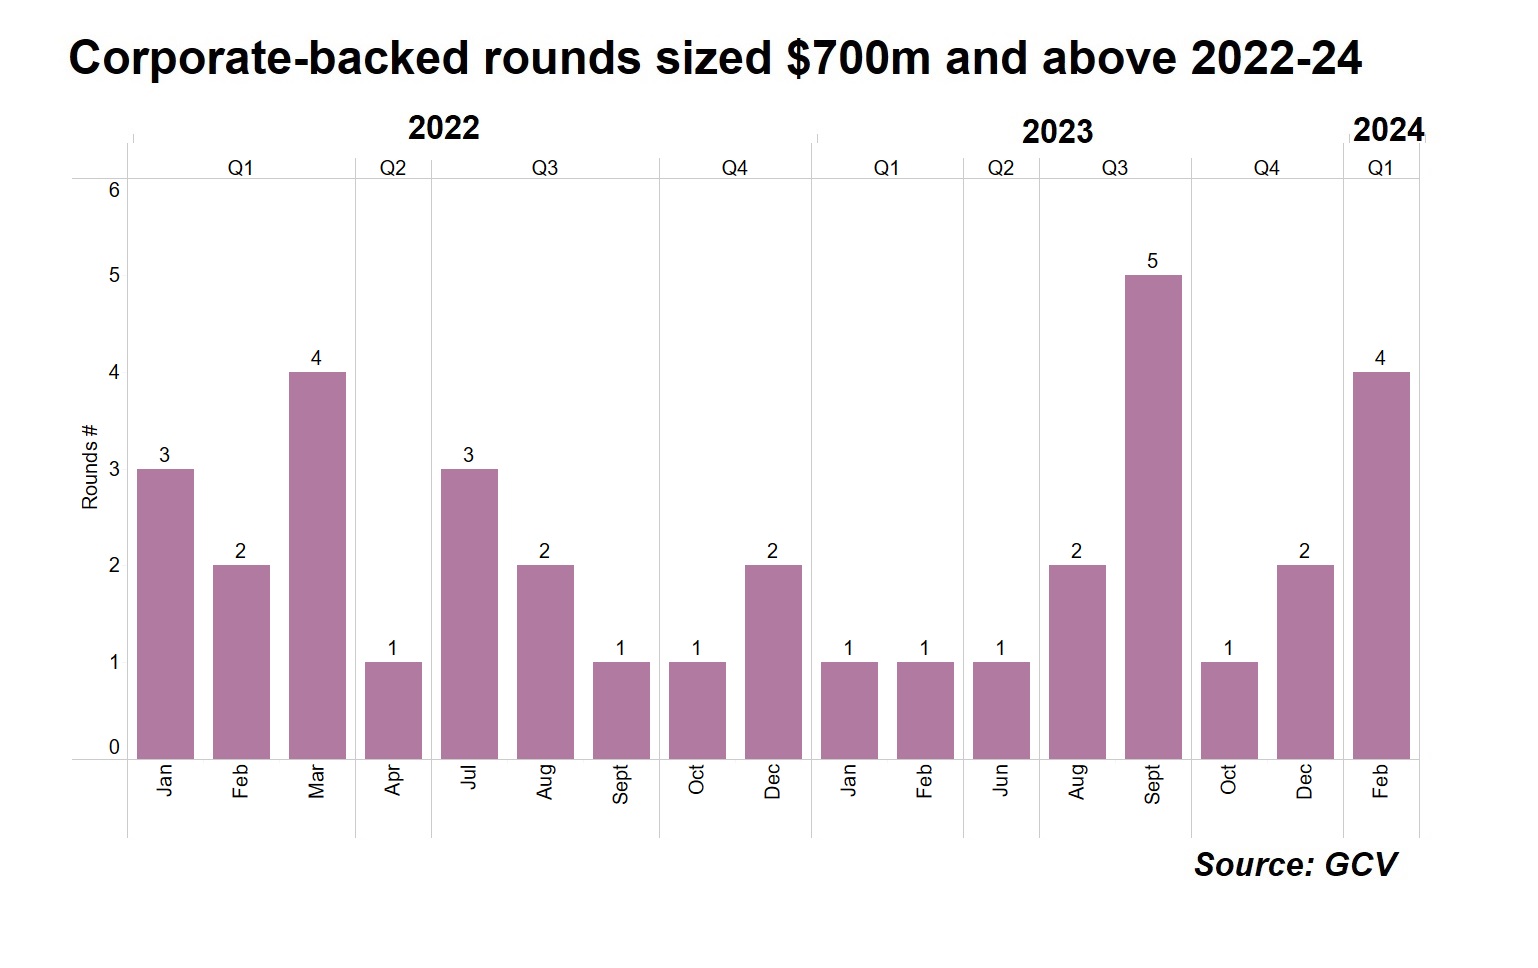 Bar chart showing Corporate-backed rounds sized $700m and above 2022-24. Source: GCV